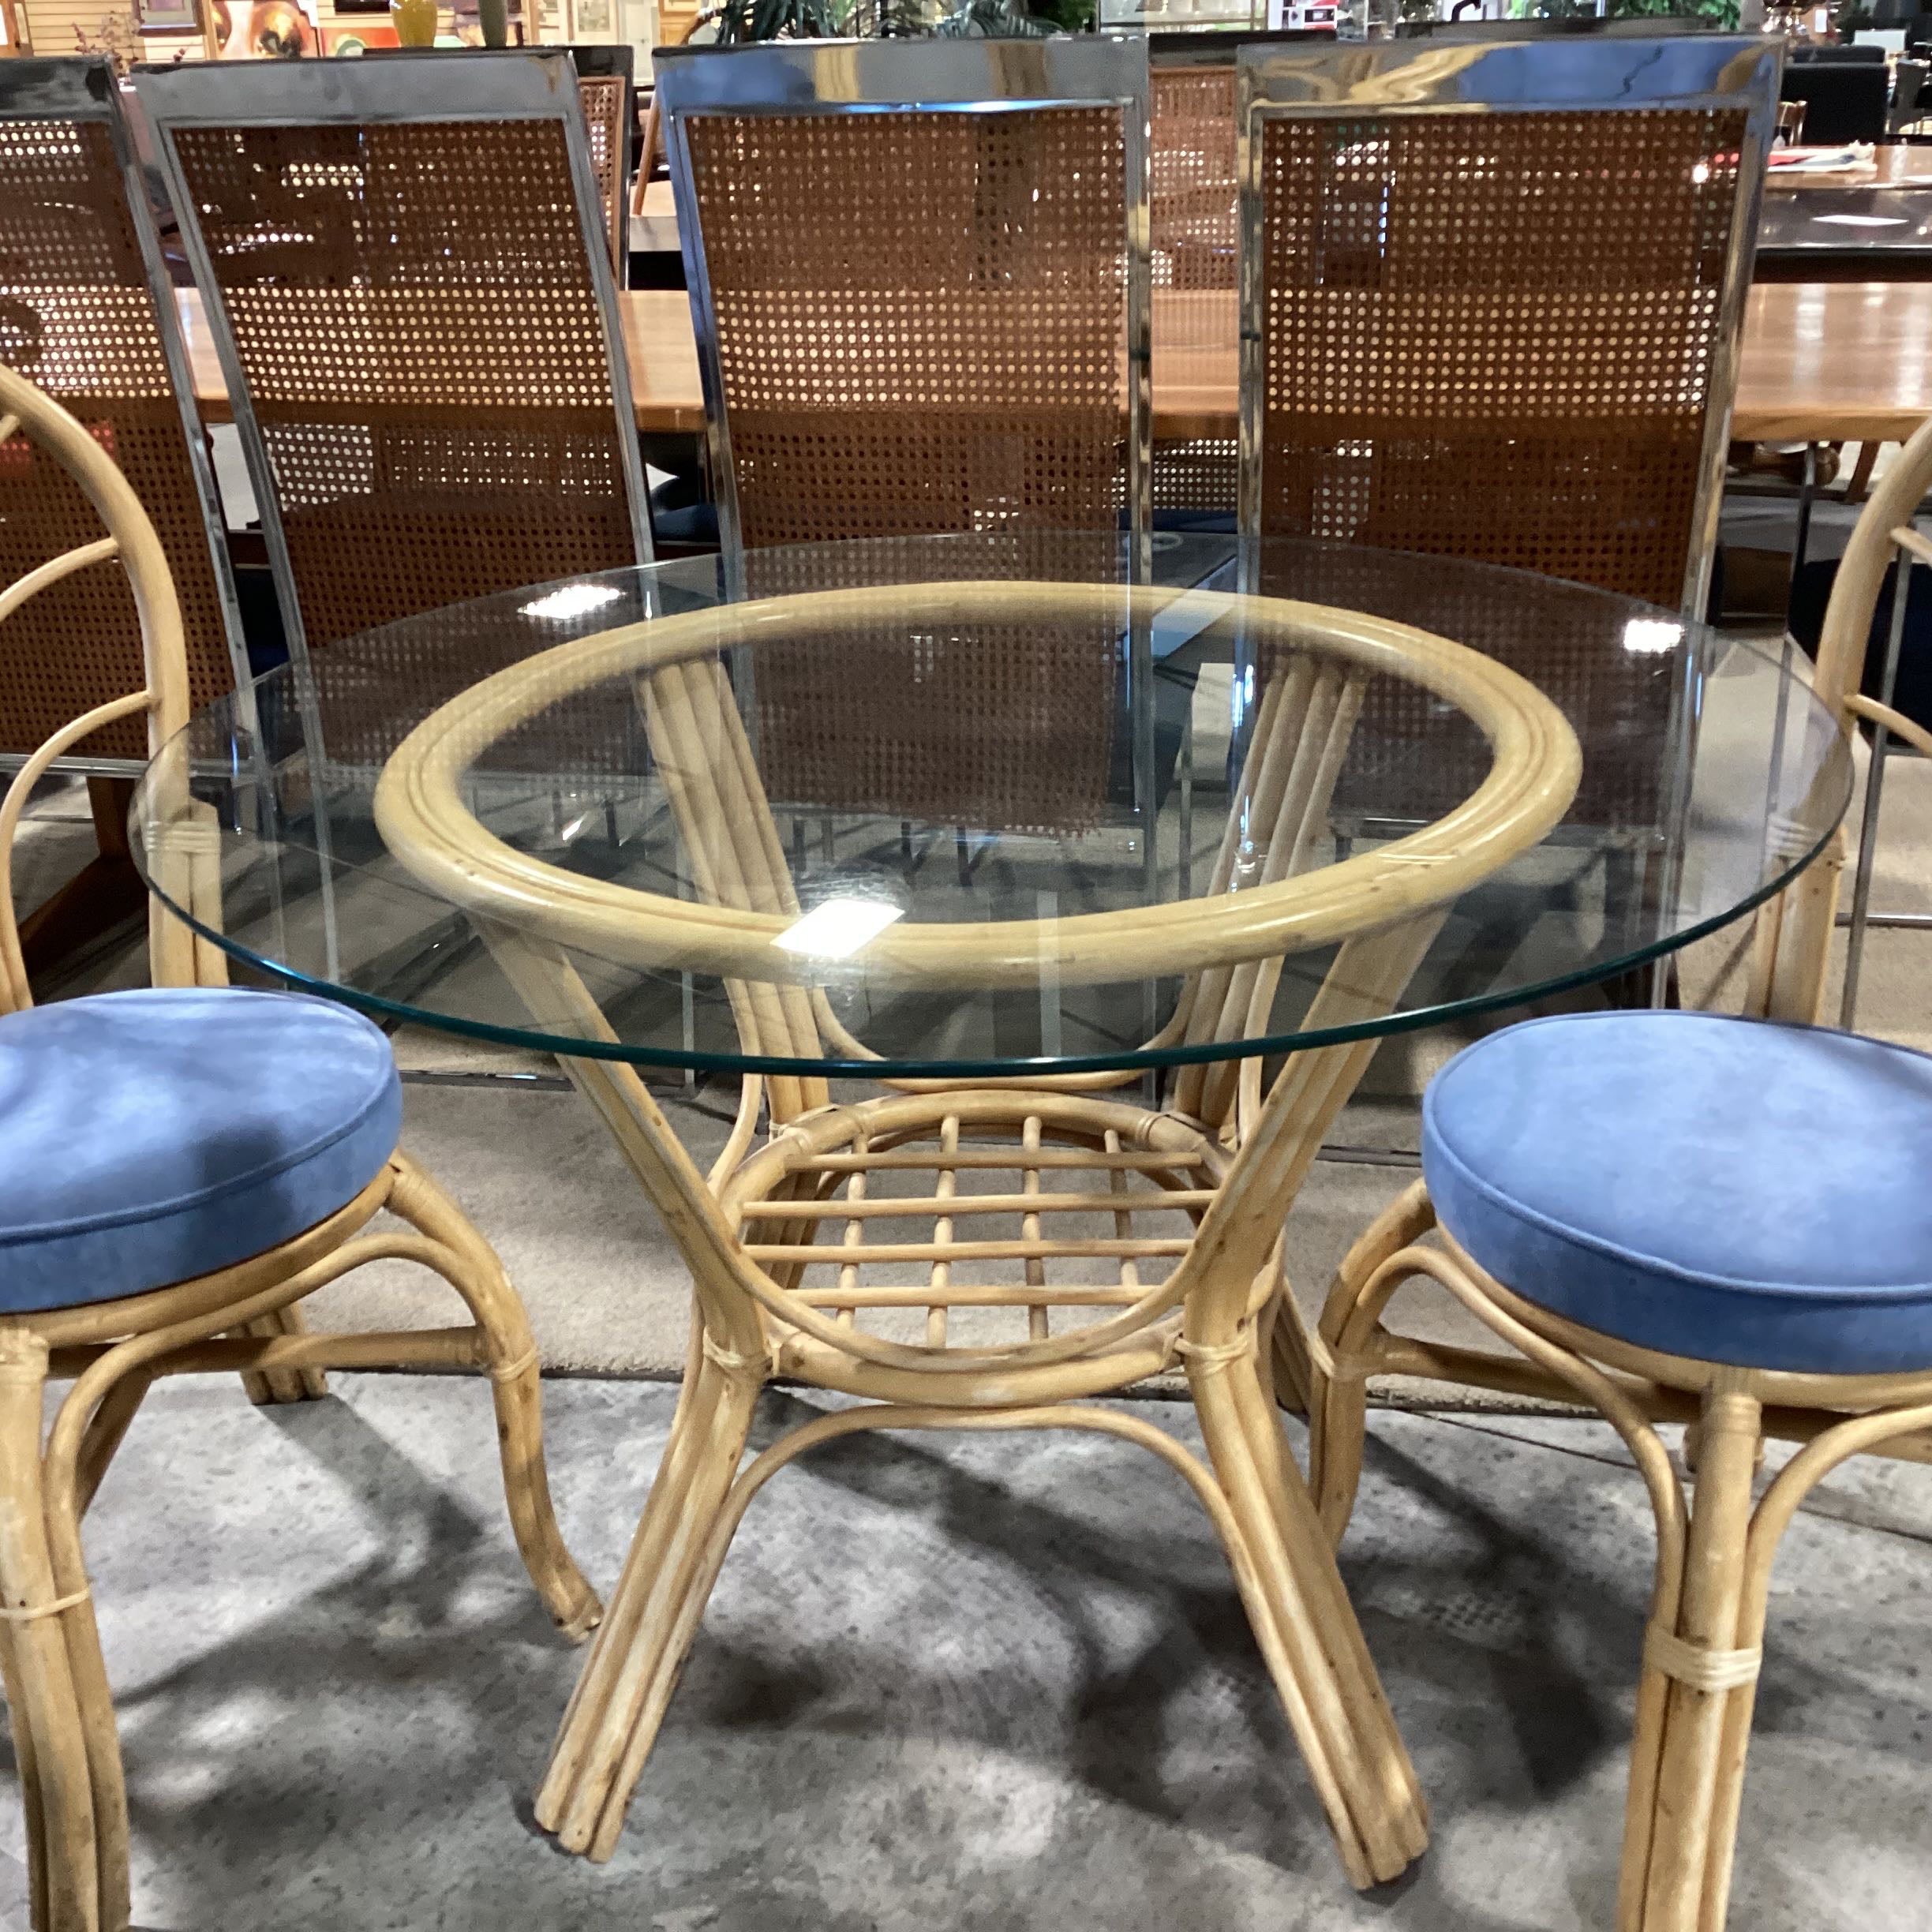 Rattan & Bamboo Style Glass Round Table with 2 Chairs Dining Set